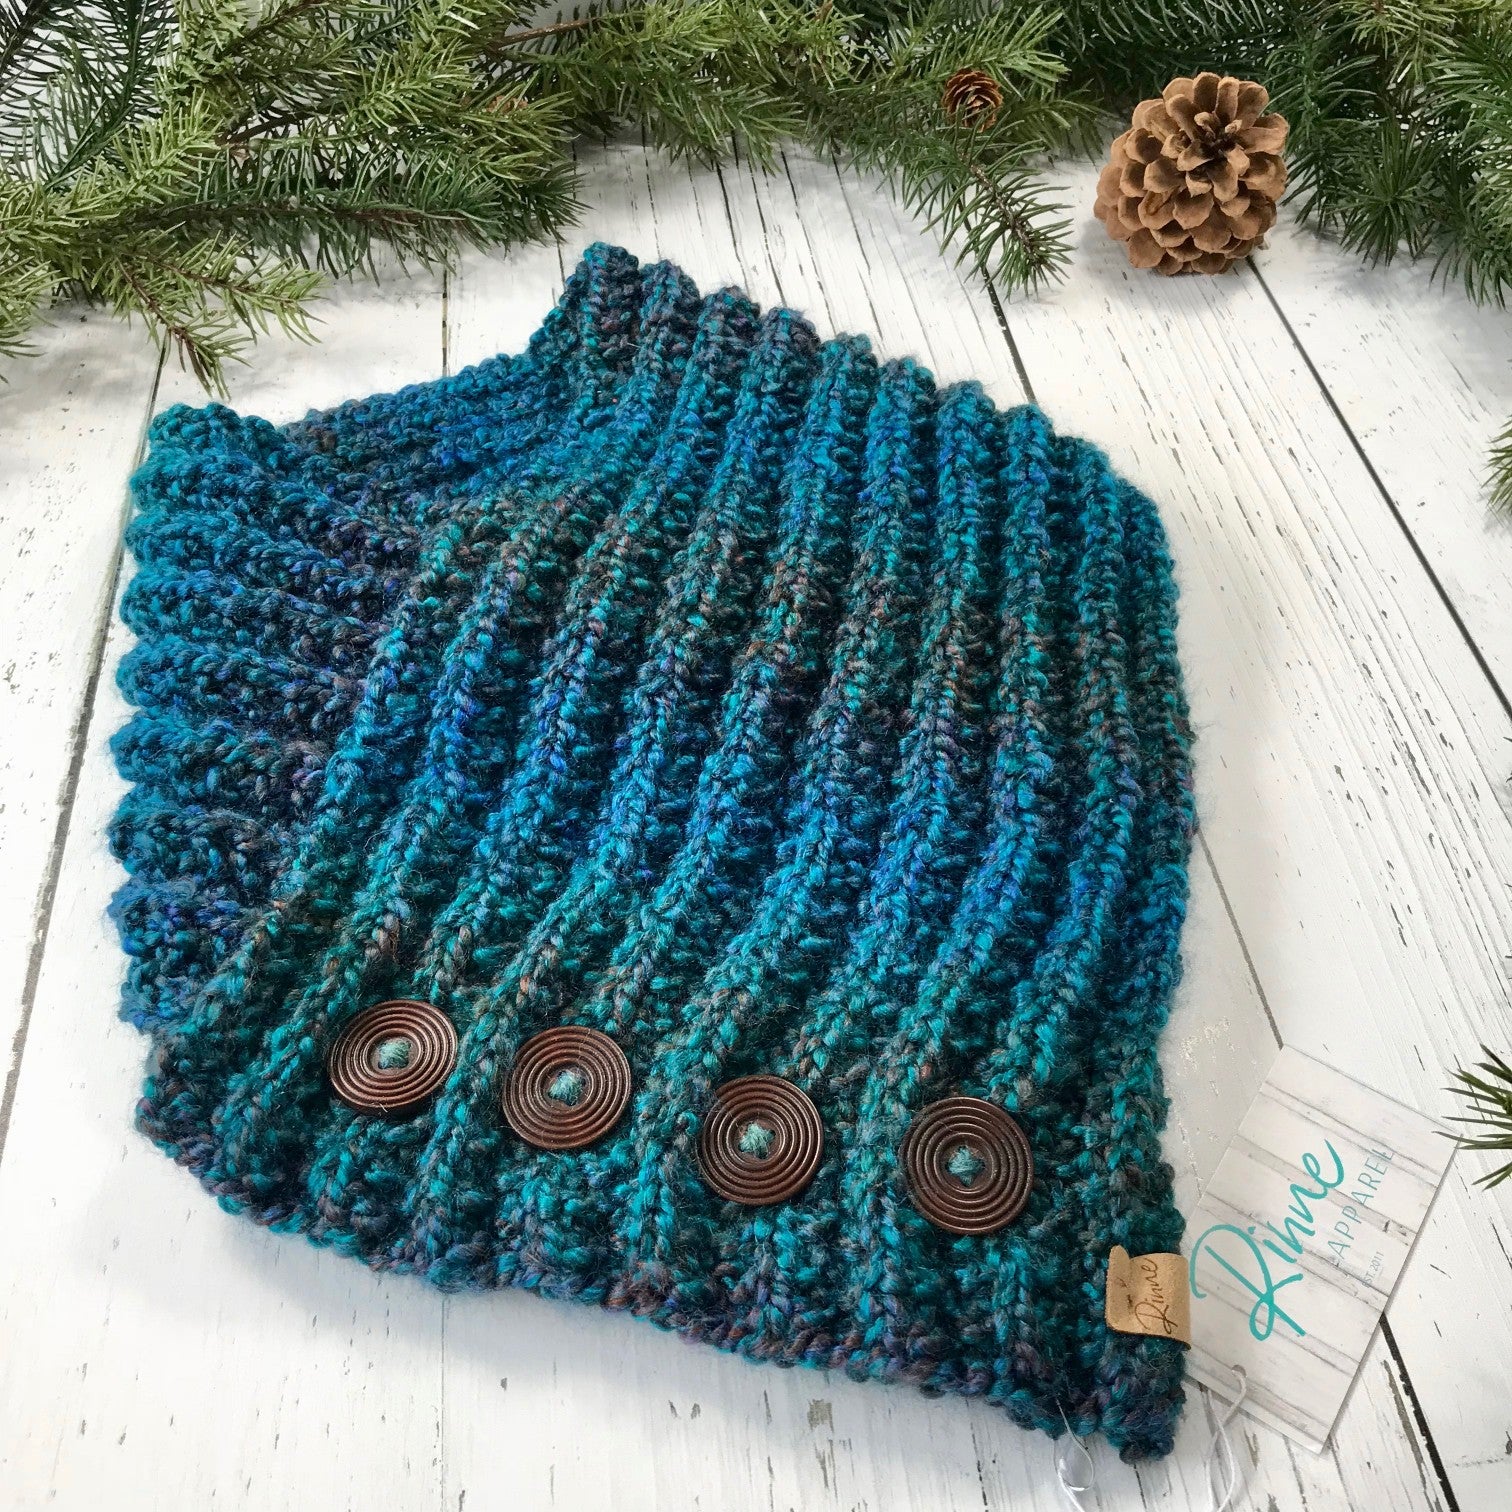 Classic Knit Button Cowl in lagoon, shades of dark teal and navy, dark wooden ridged buttons